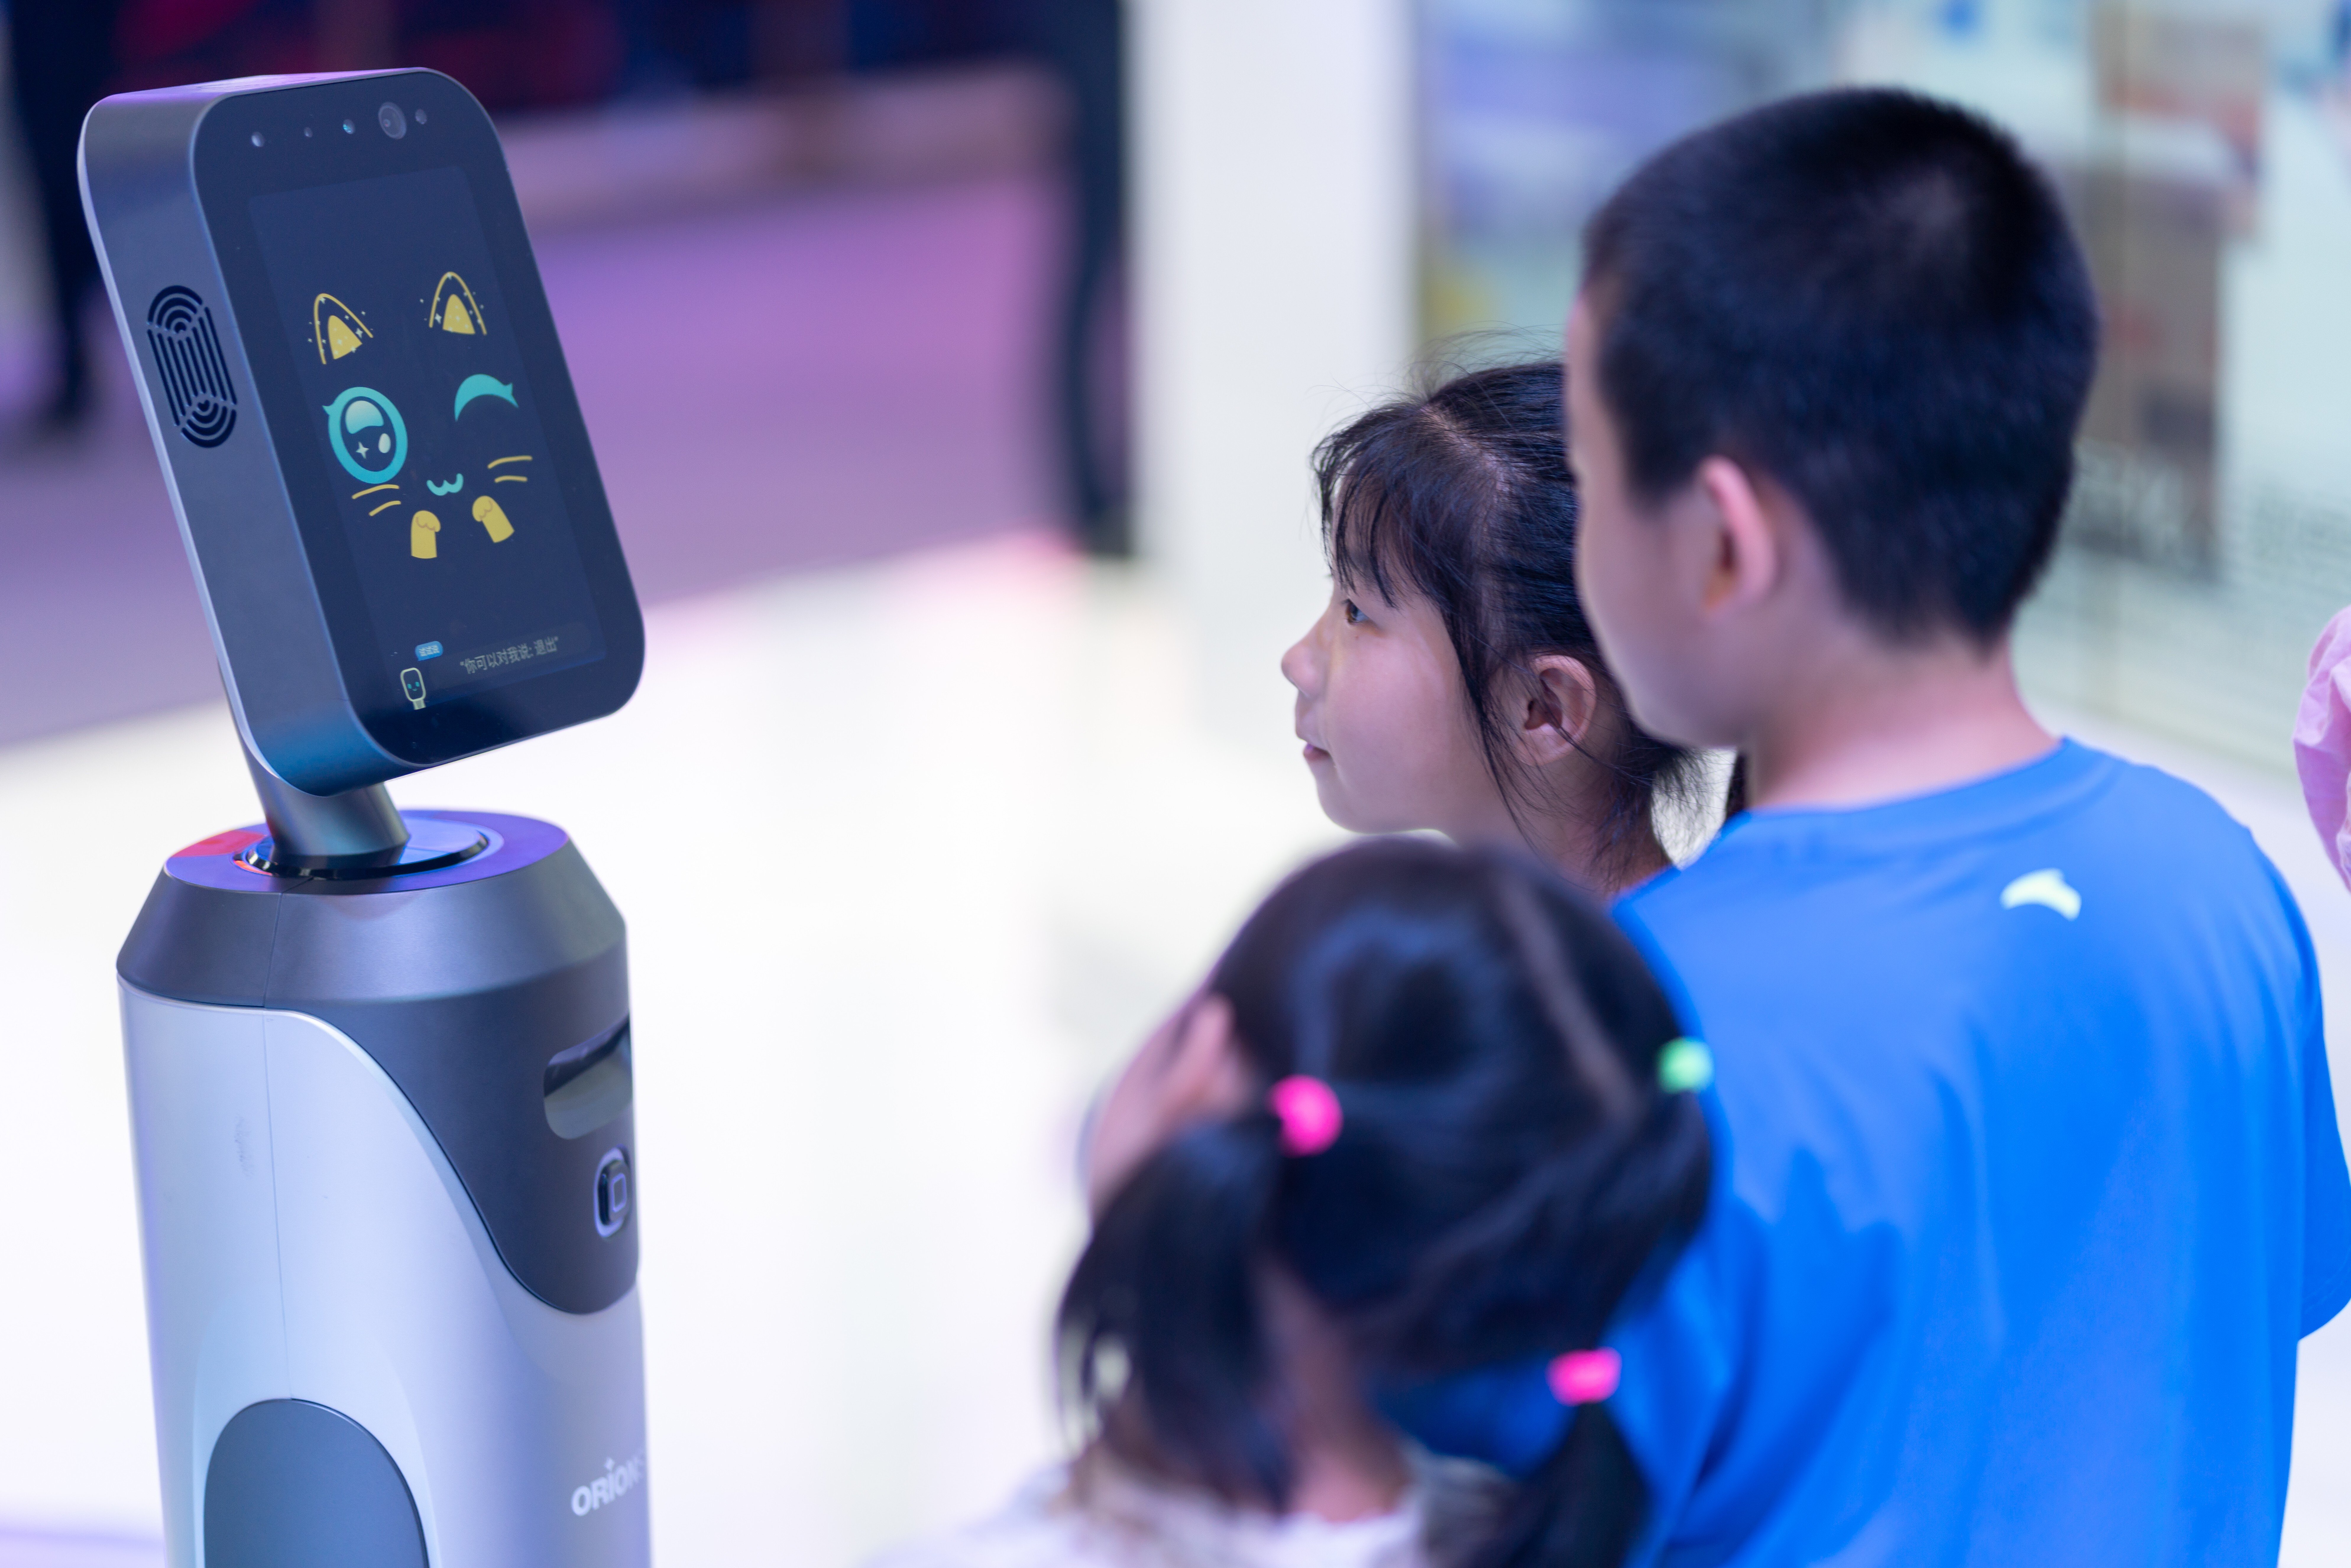 The Covid-19 pandemic has accelerated the global digitalisation of education, with advanced technologies such as artificial intelligence set to define the future of learning. Photo: helloabc/Shutterstock